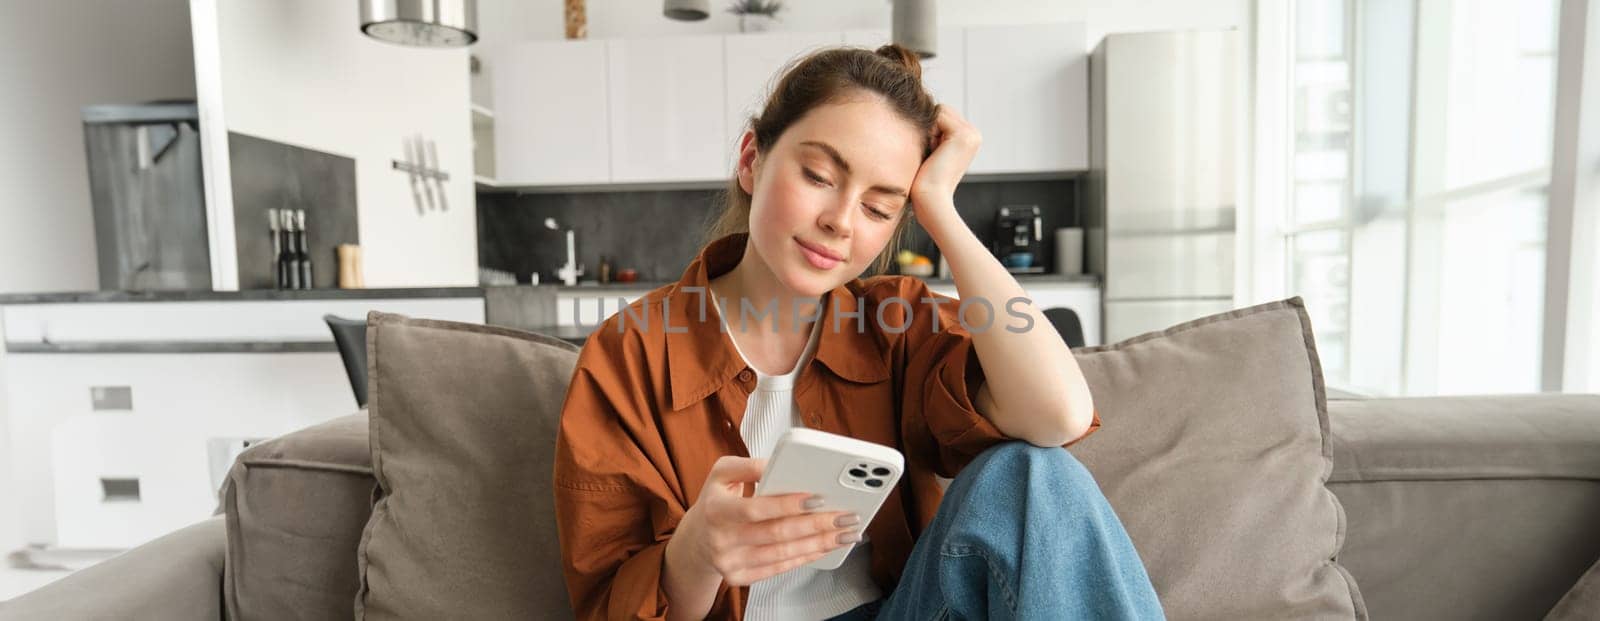 Portrait of young modern woman reading on mobile phone, scrolling social media app on smartphone, sitting on couch in living room in casual clothes.